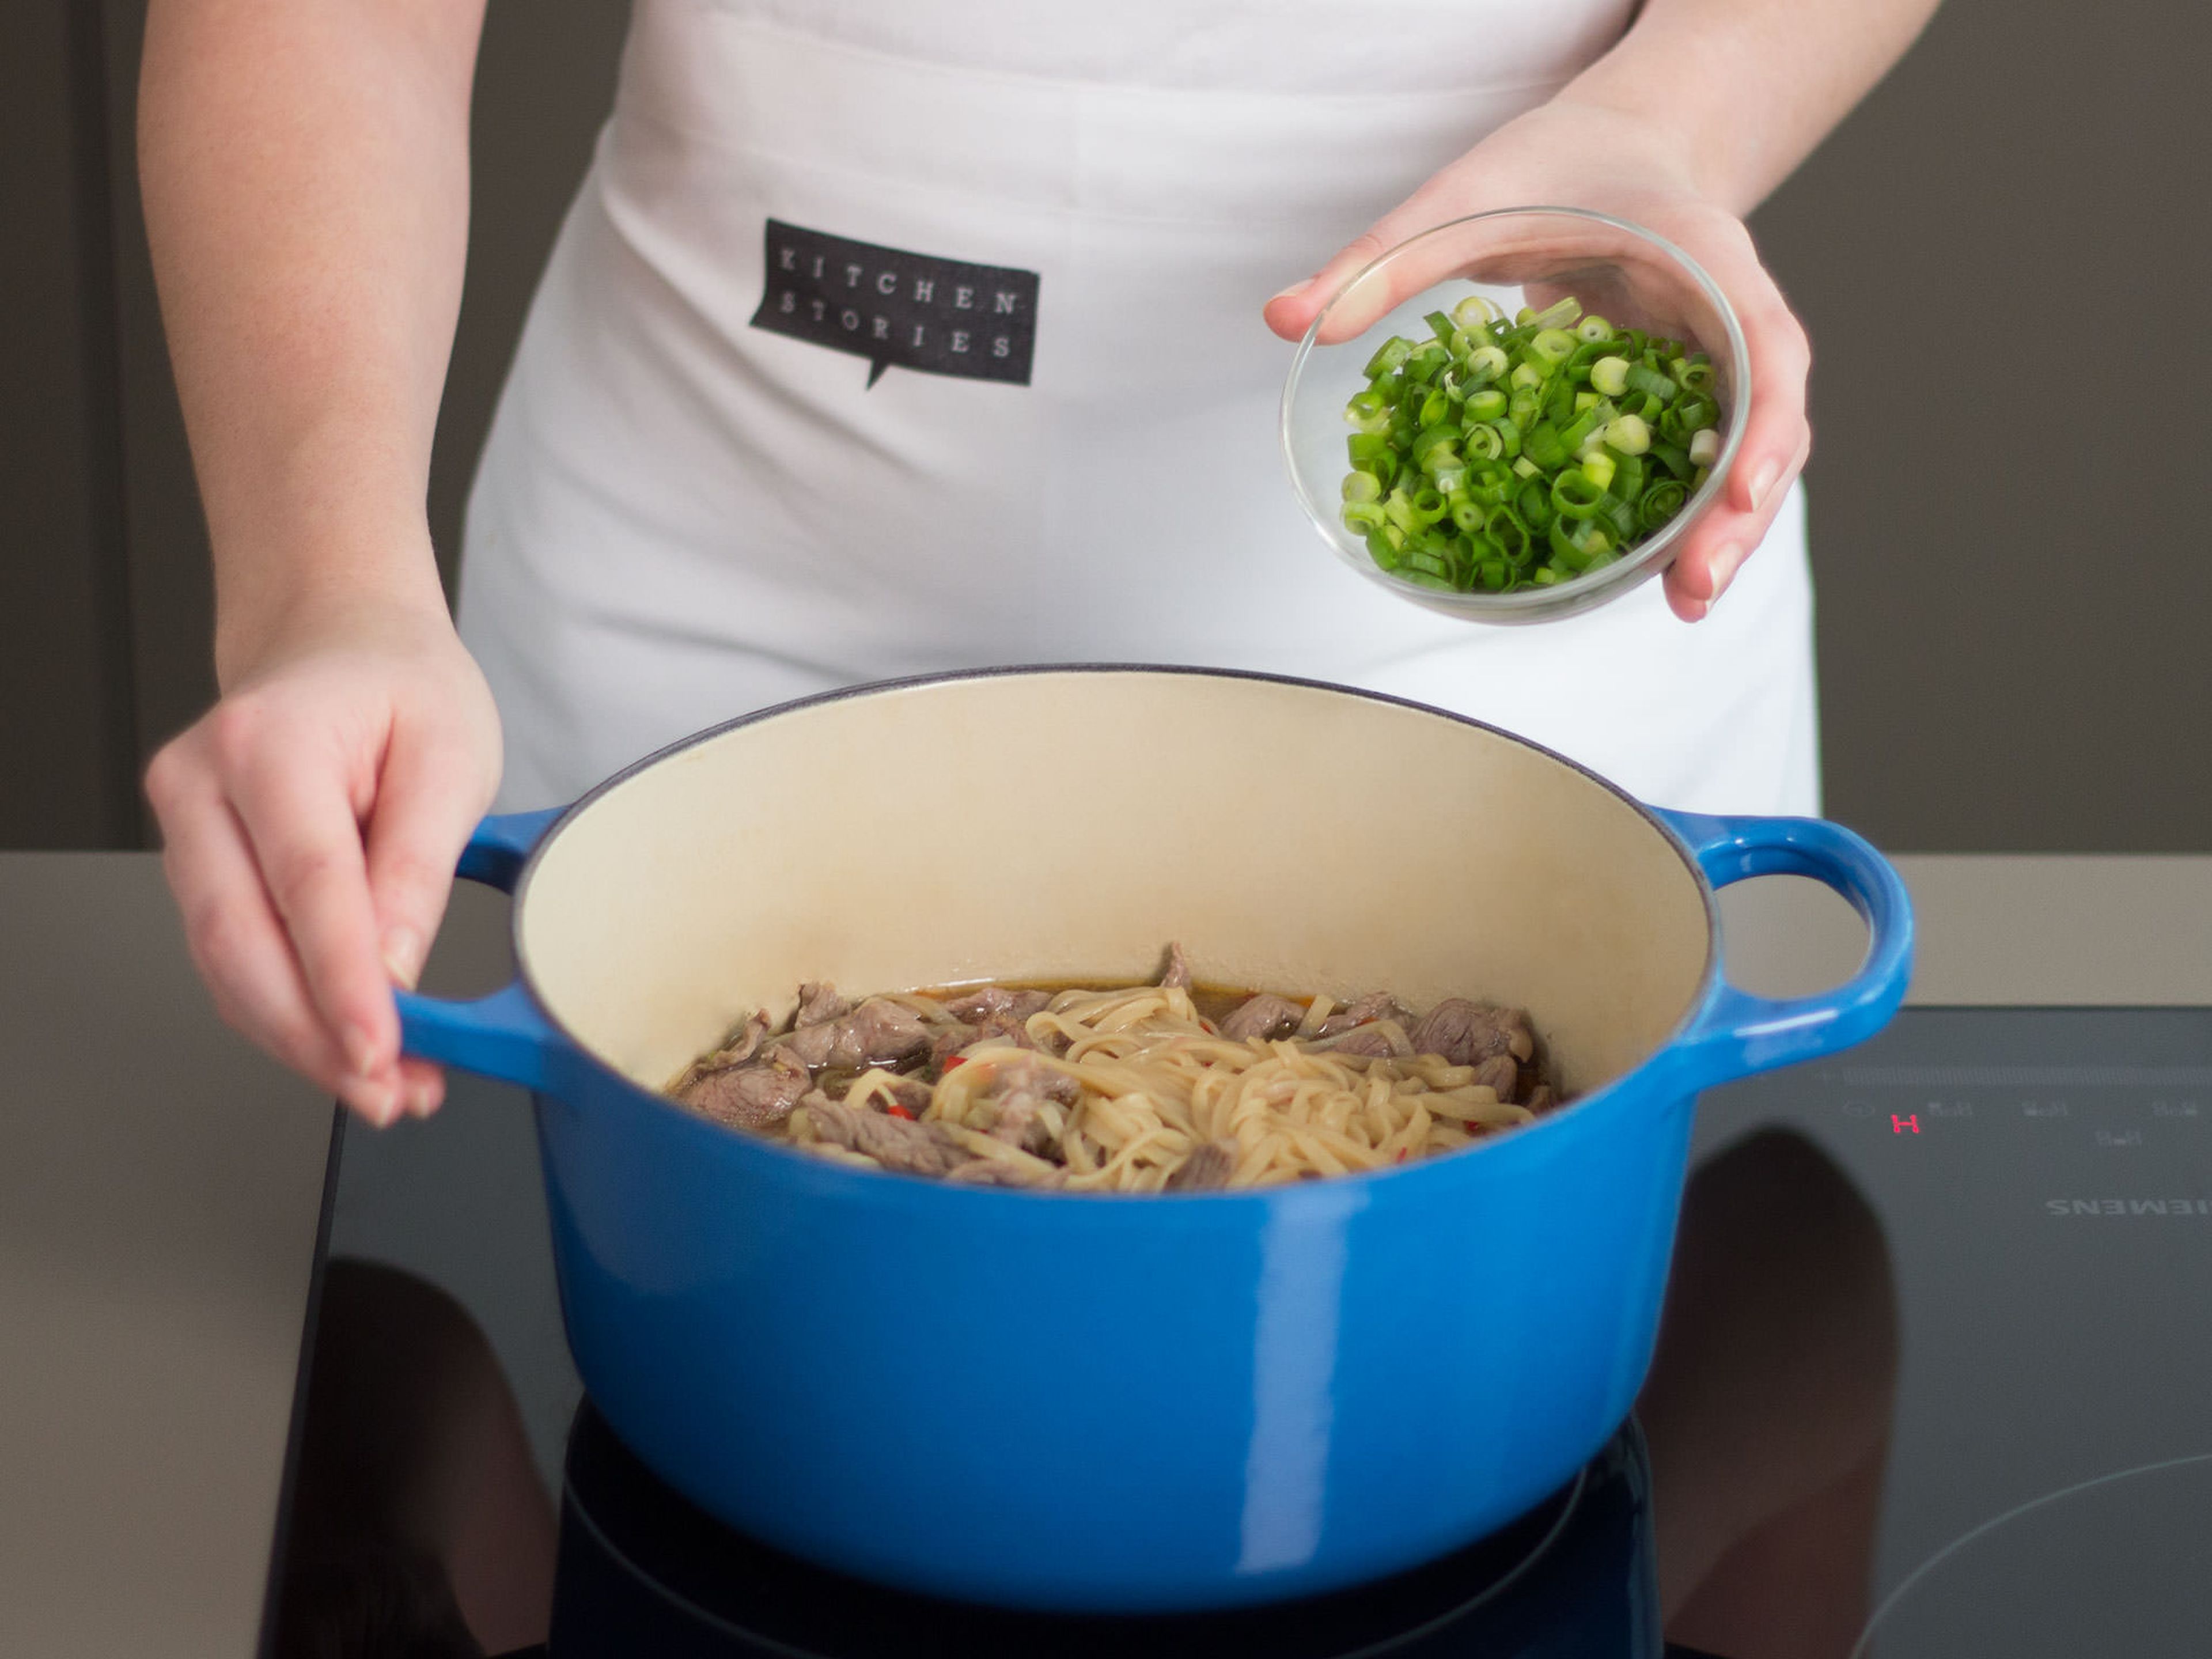 Add sliced beef and green onions and simmer for approx. 3 – 5 min. until the beef is just cooked. Add cilantro, salt, and pepper to taste. Enjoy!